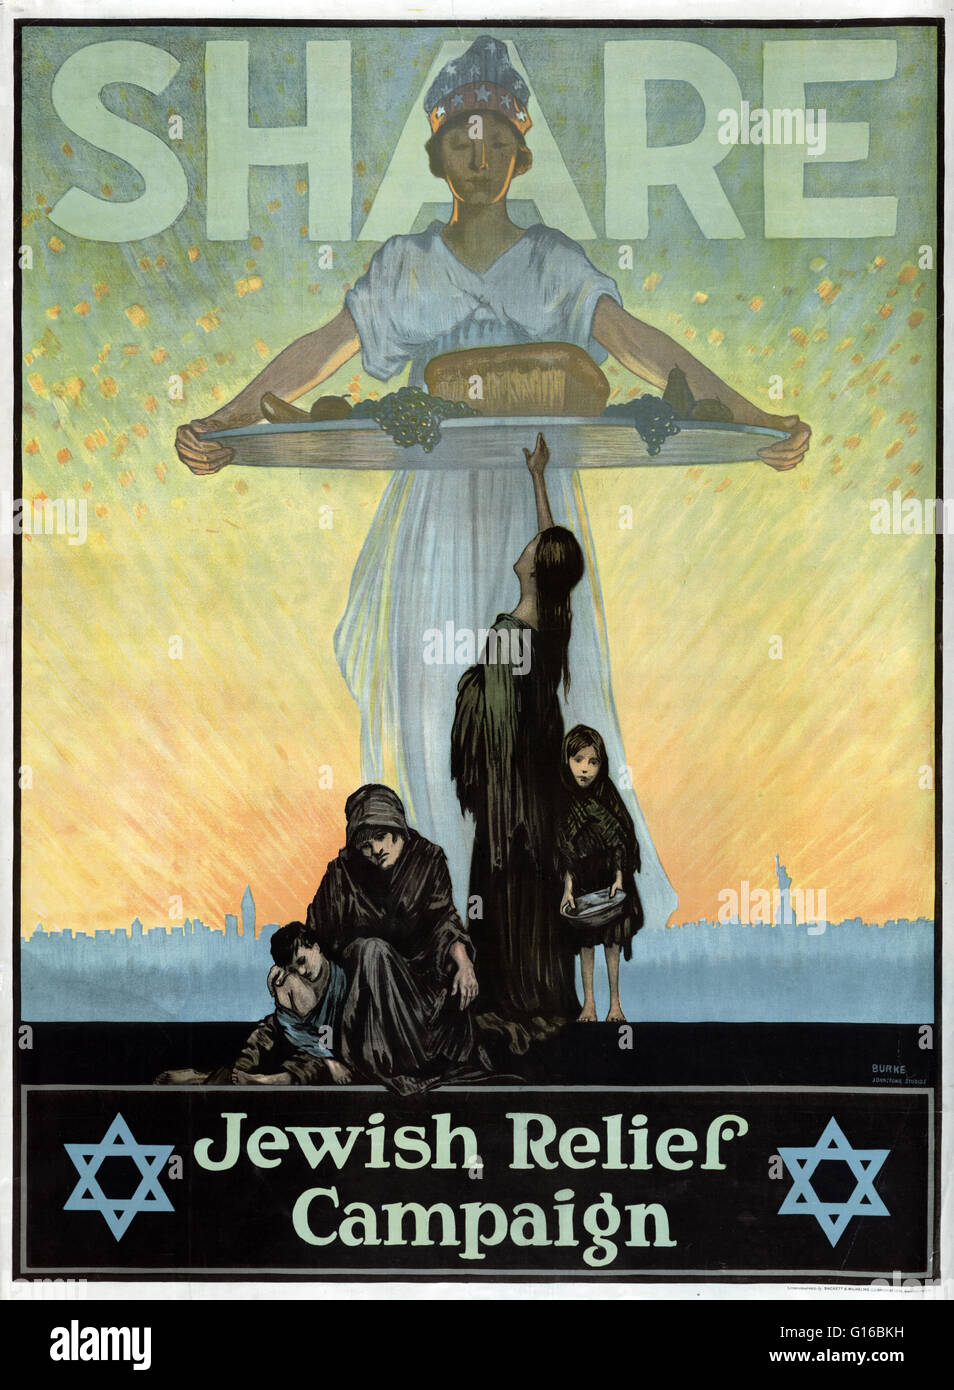 Entitled: 'Share - Jewish Relief Campaign'. Poster showing a monumental female figure with a tray of food, poor women and children at her feet, with the skyline of New York City in the background. In the early days of WW, groups representing three diverse Stock Photo